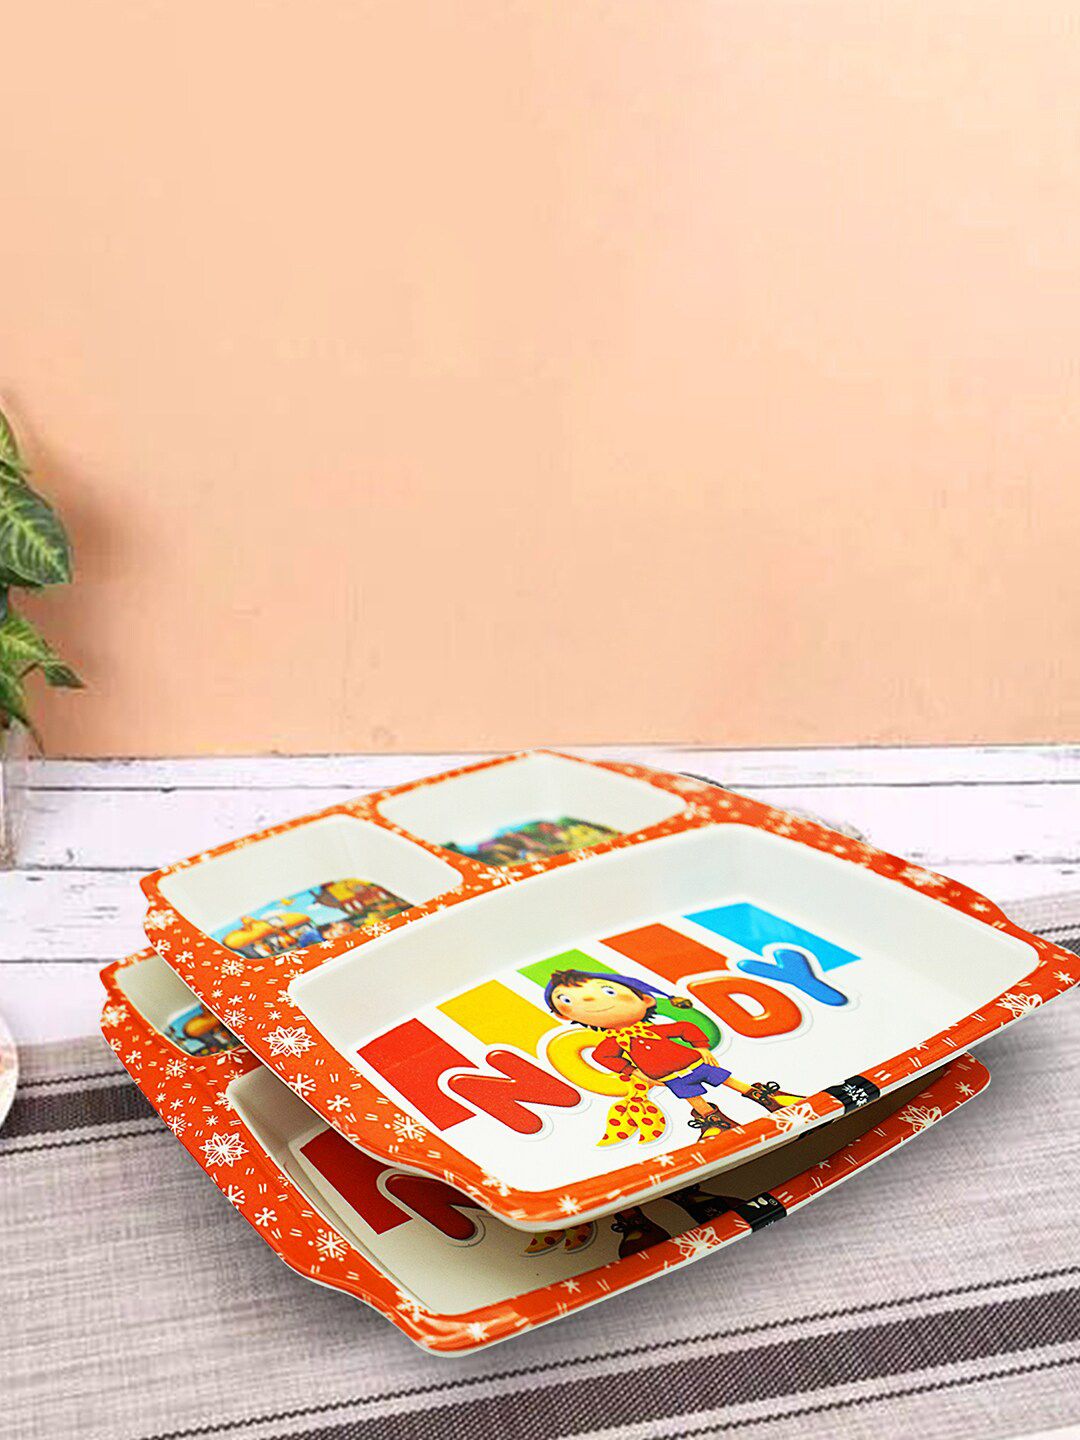 Gallery99 Red & White 2 Pieces Text or Slogans Printed Melamine Glossy Plates Price in India